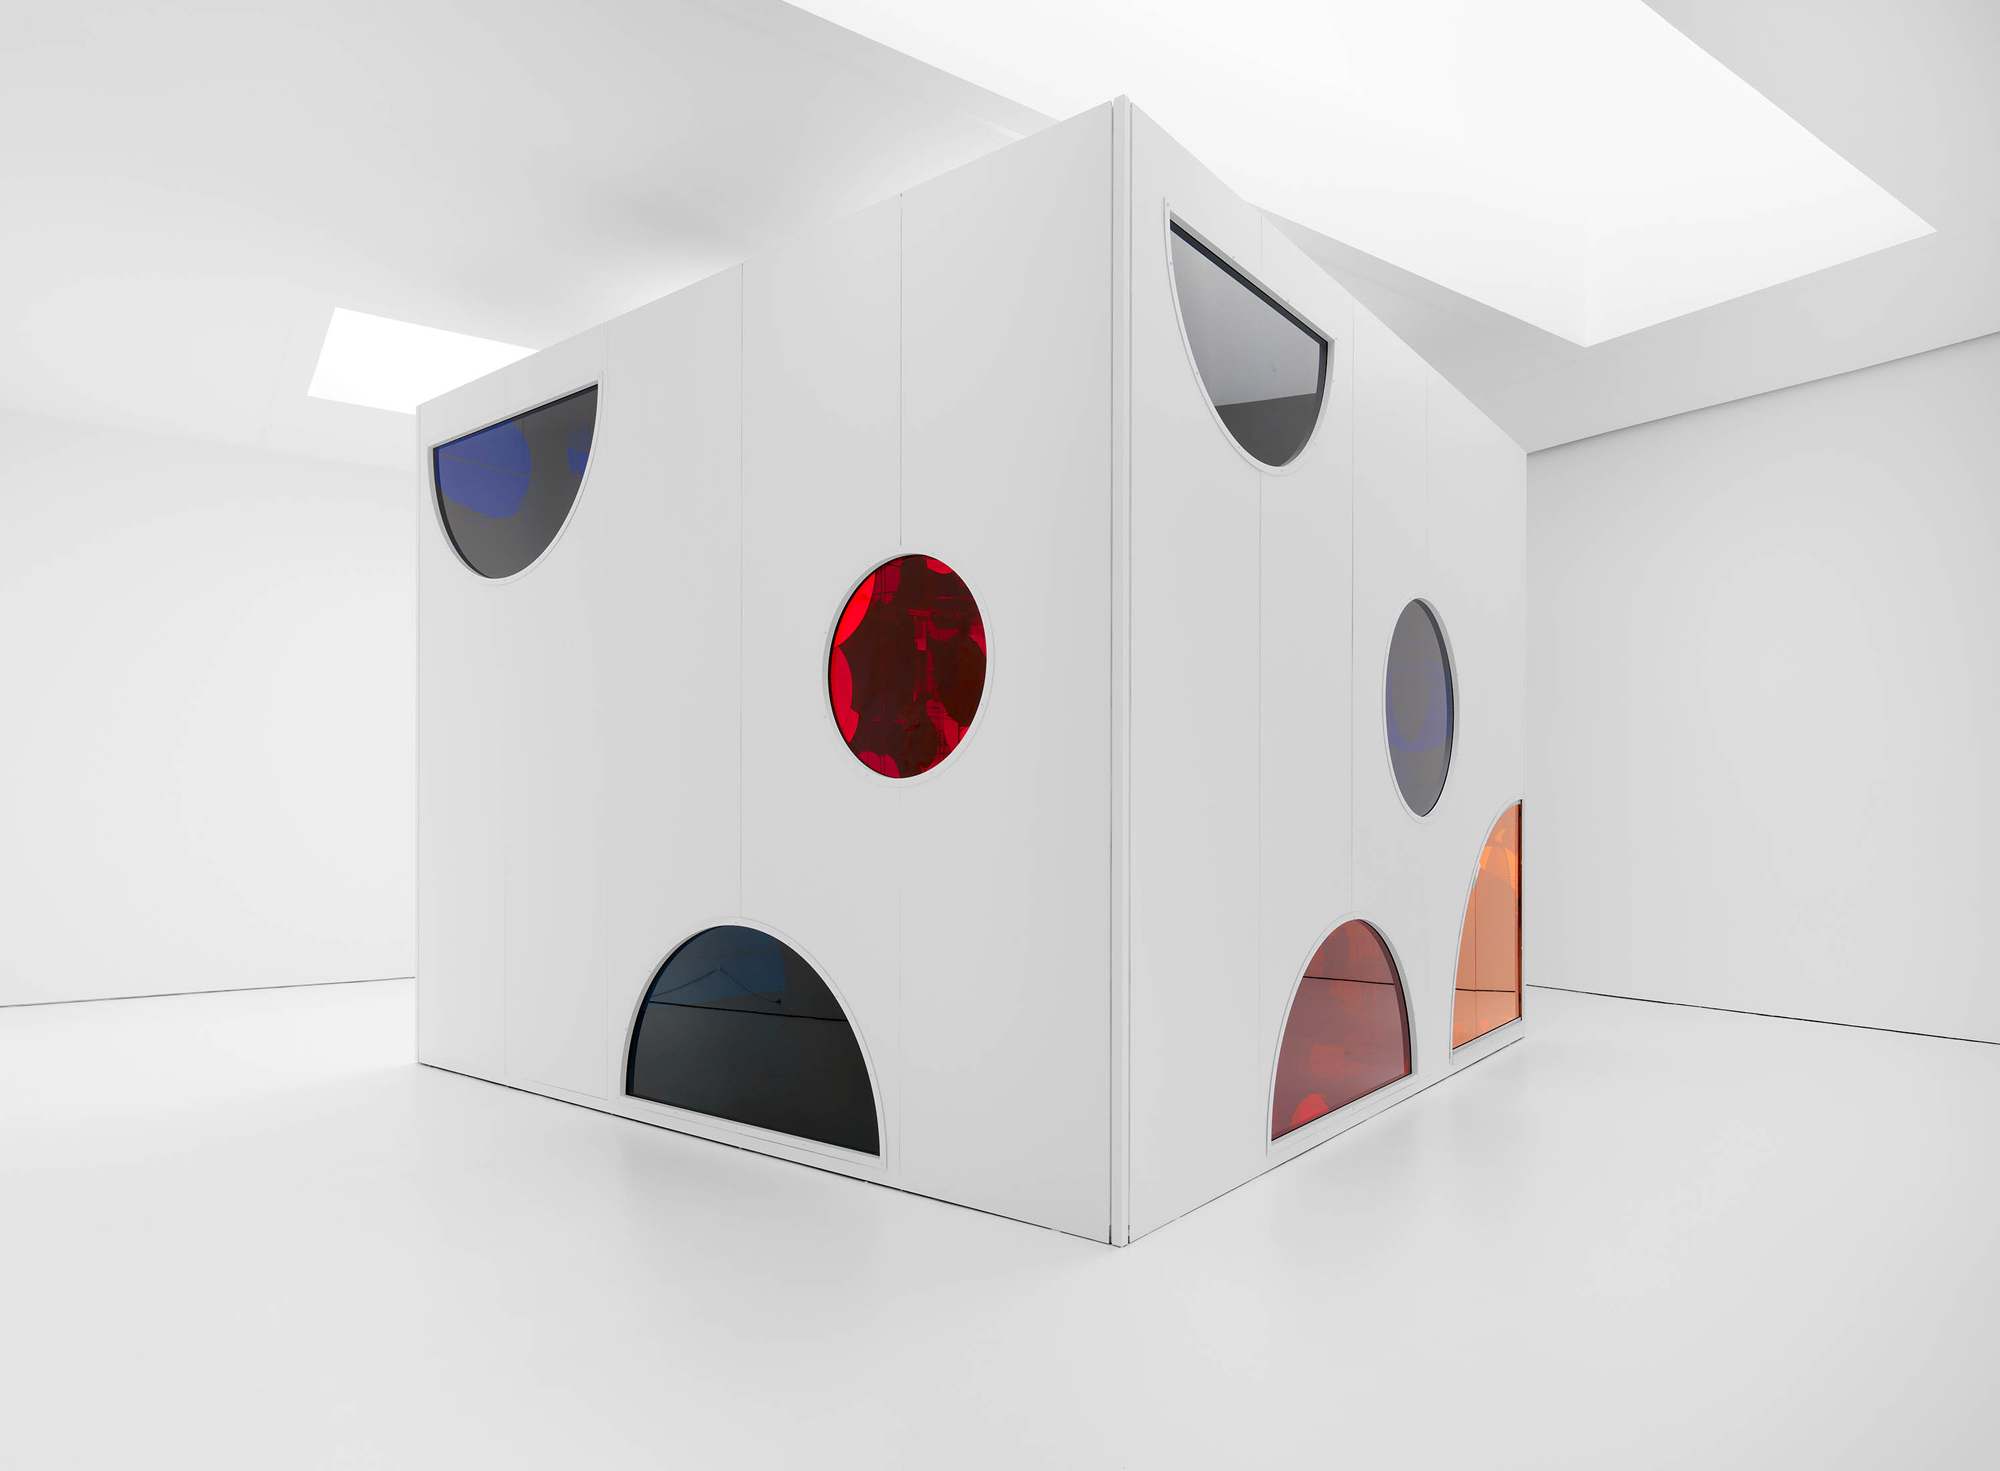 White room with a large white cube at center, dotted by colorful circular windows